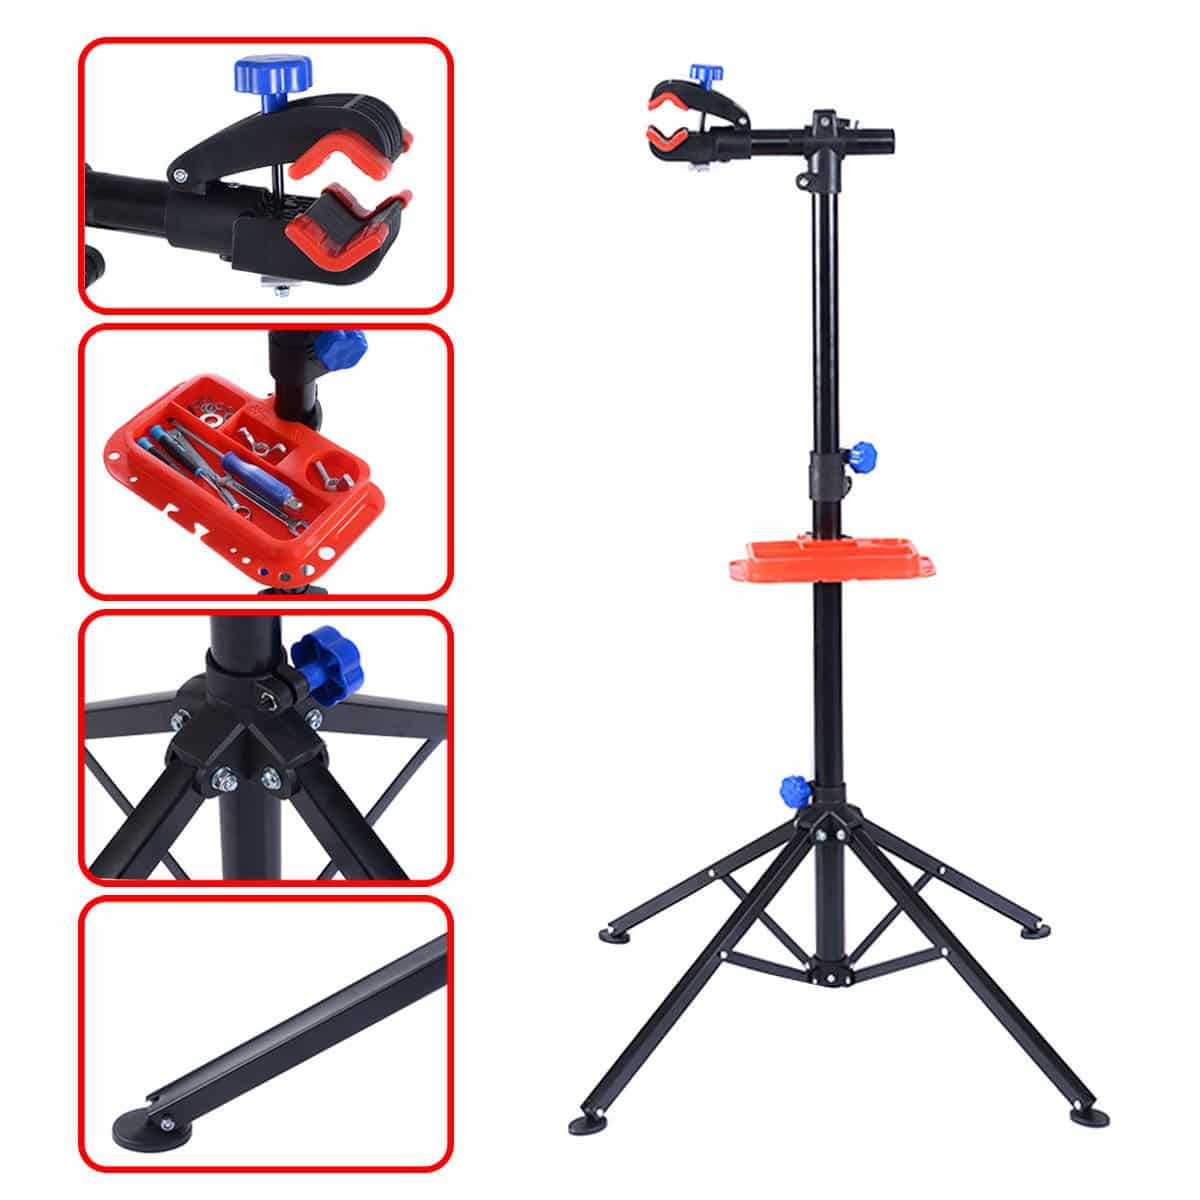 S AFSTAR Pro Mechanic Bike Repair Stand Adjustable 41" to 75" Cycle Rack Bicycle Workstand Tool Tray